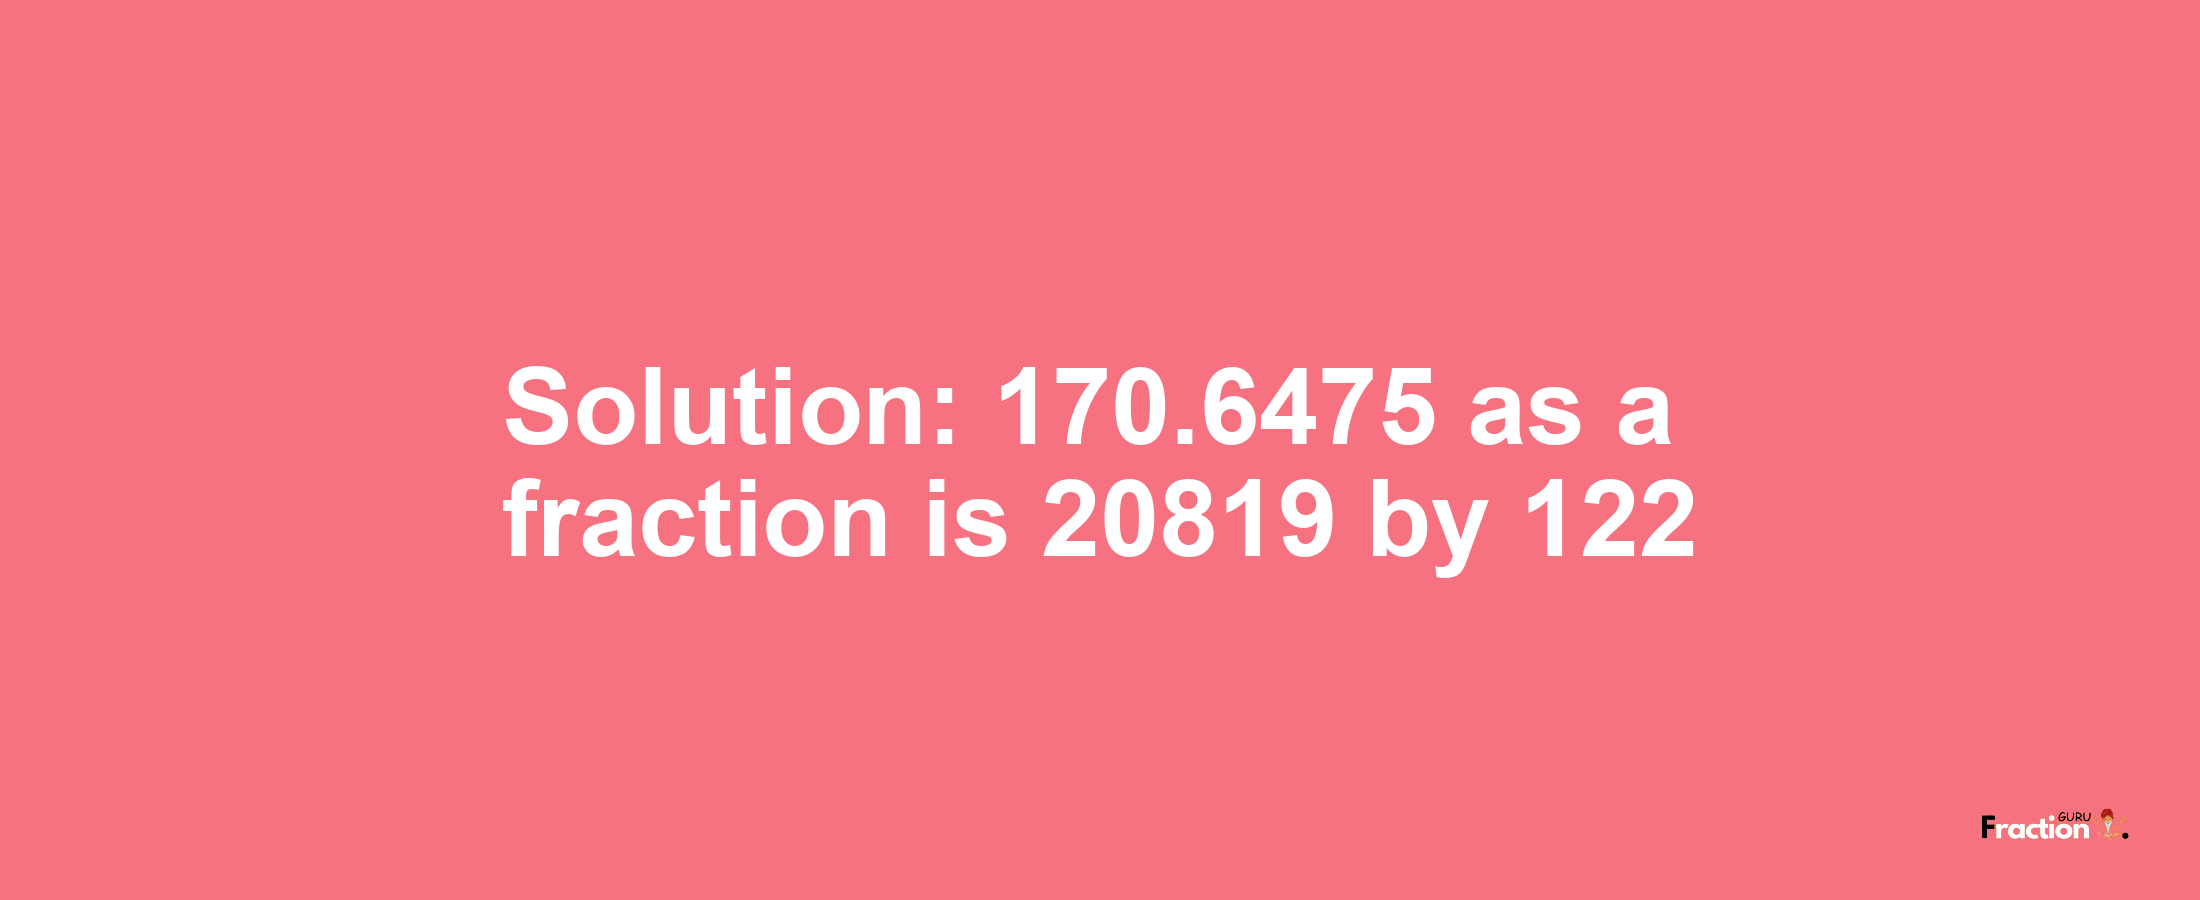 Solution:170.6475 as a fraction is 20819/122